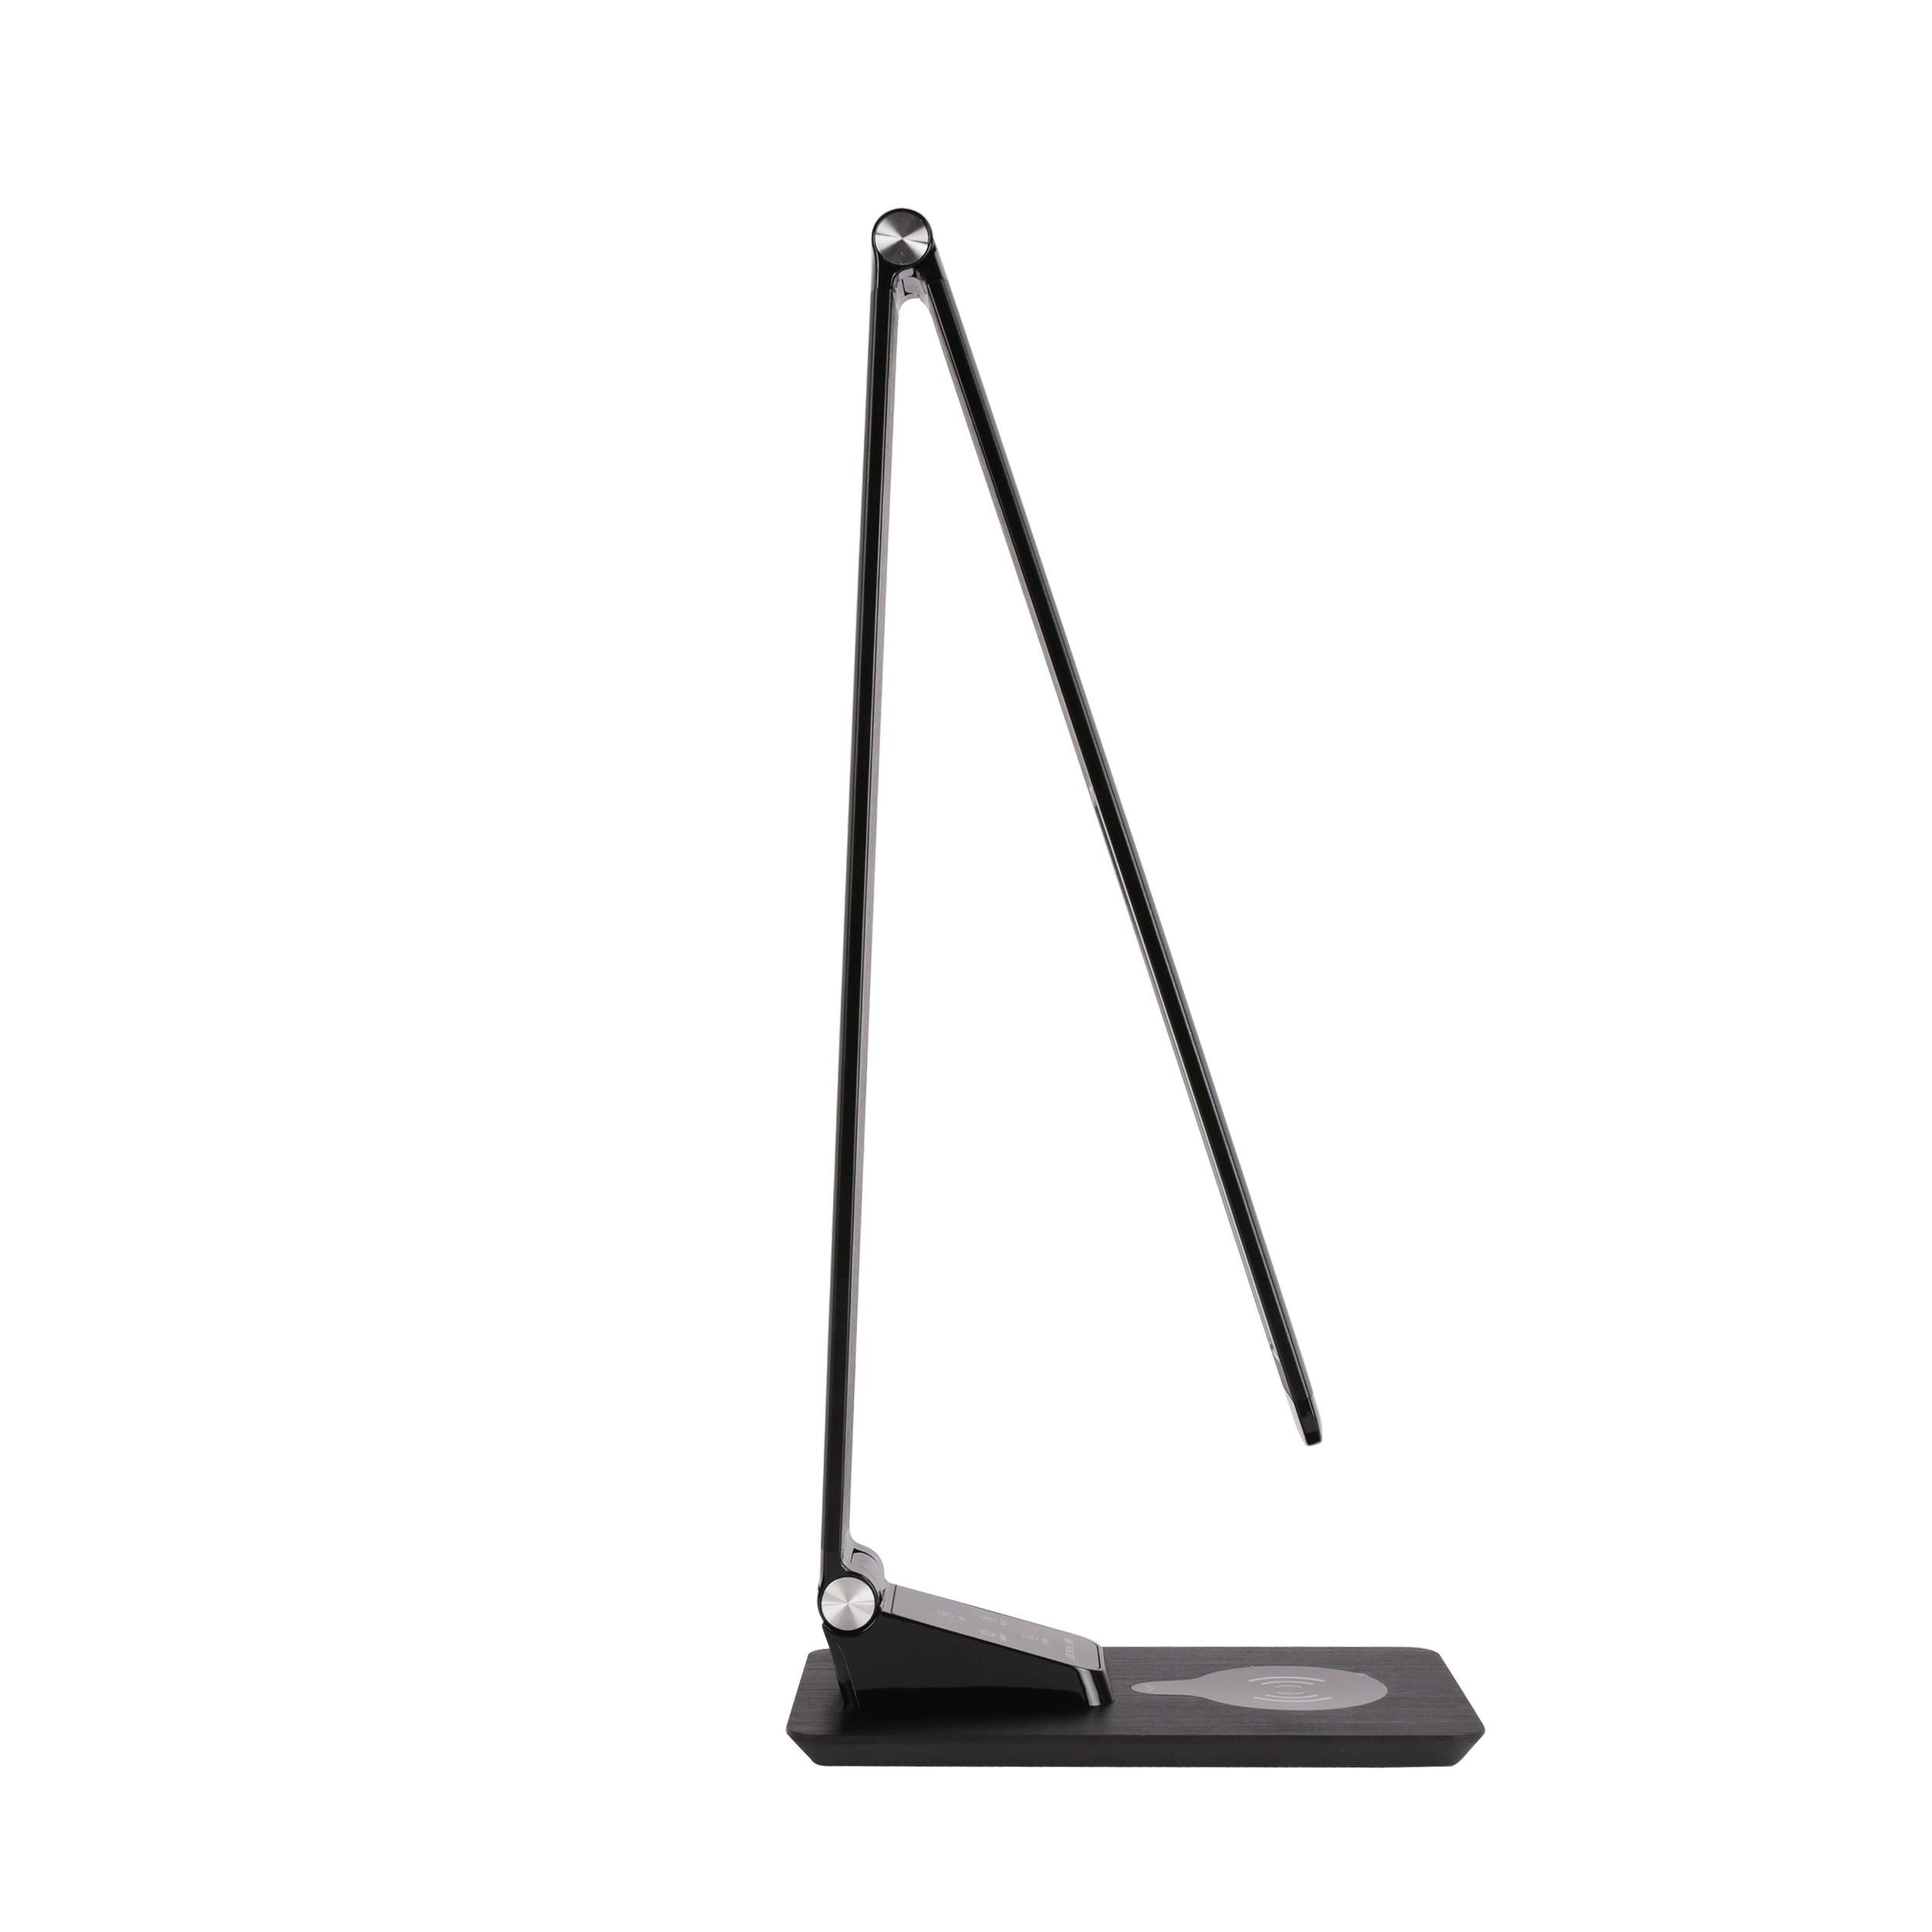 50-4872 LED Foldable Table Lamp with Wireless Charger